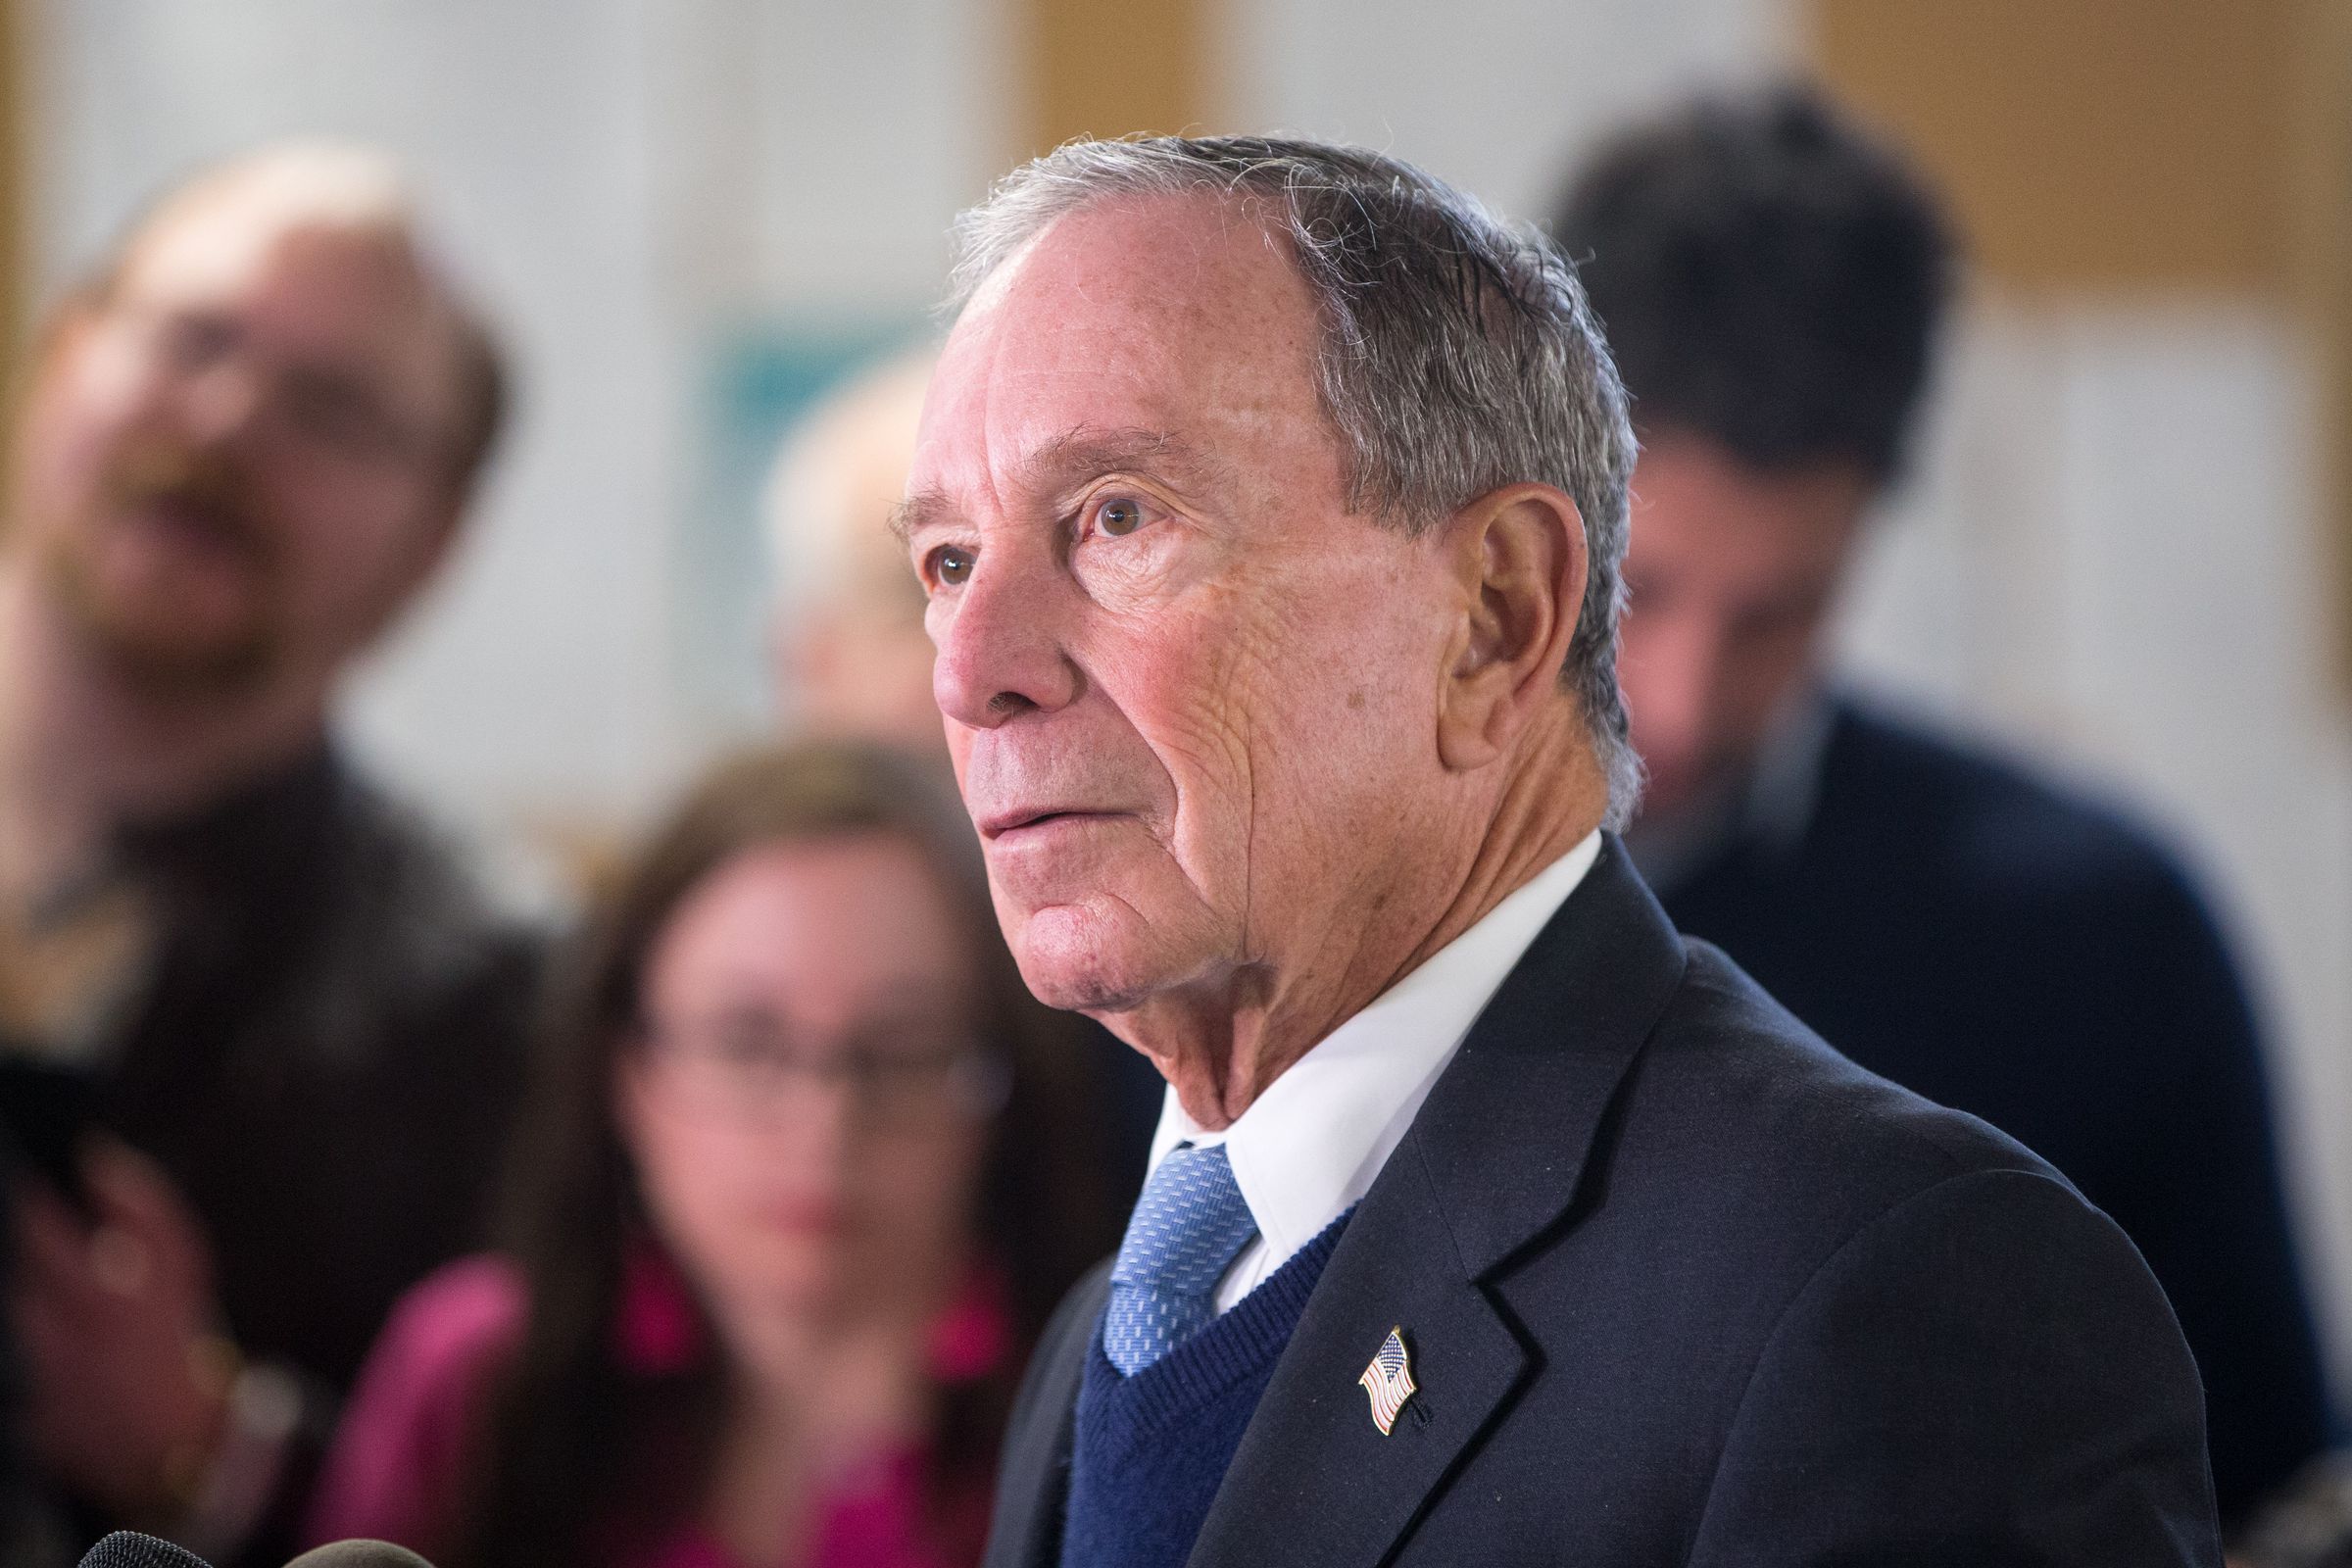 Michael Bloomberg Visits New Hampshire For Exploratory Trip